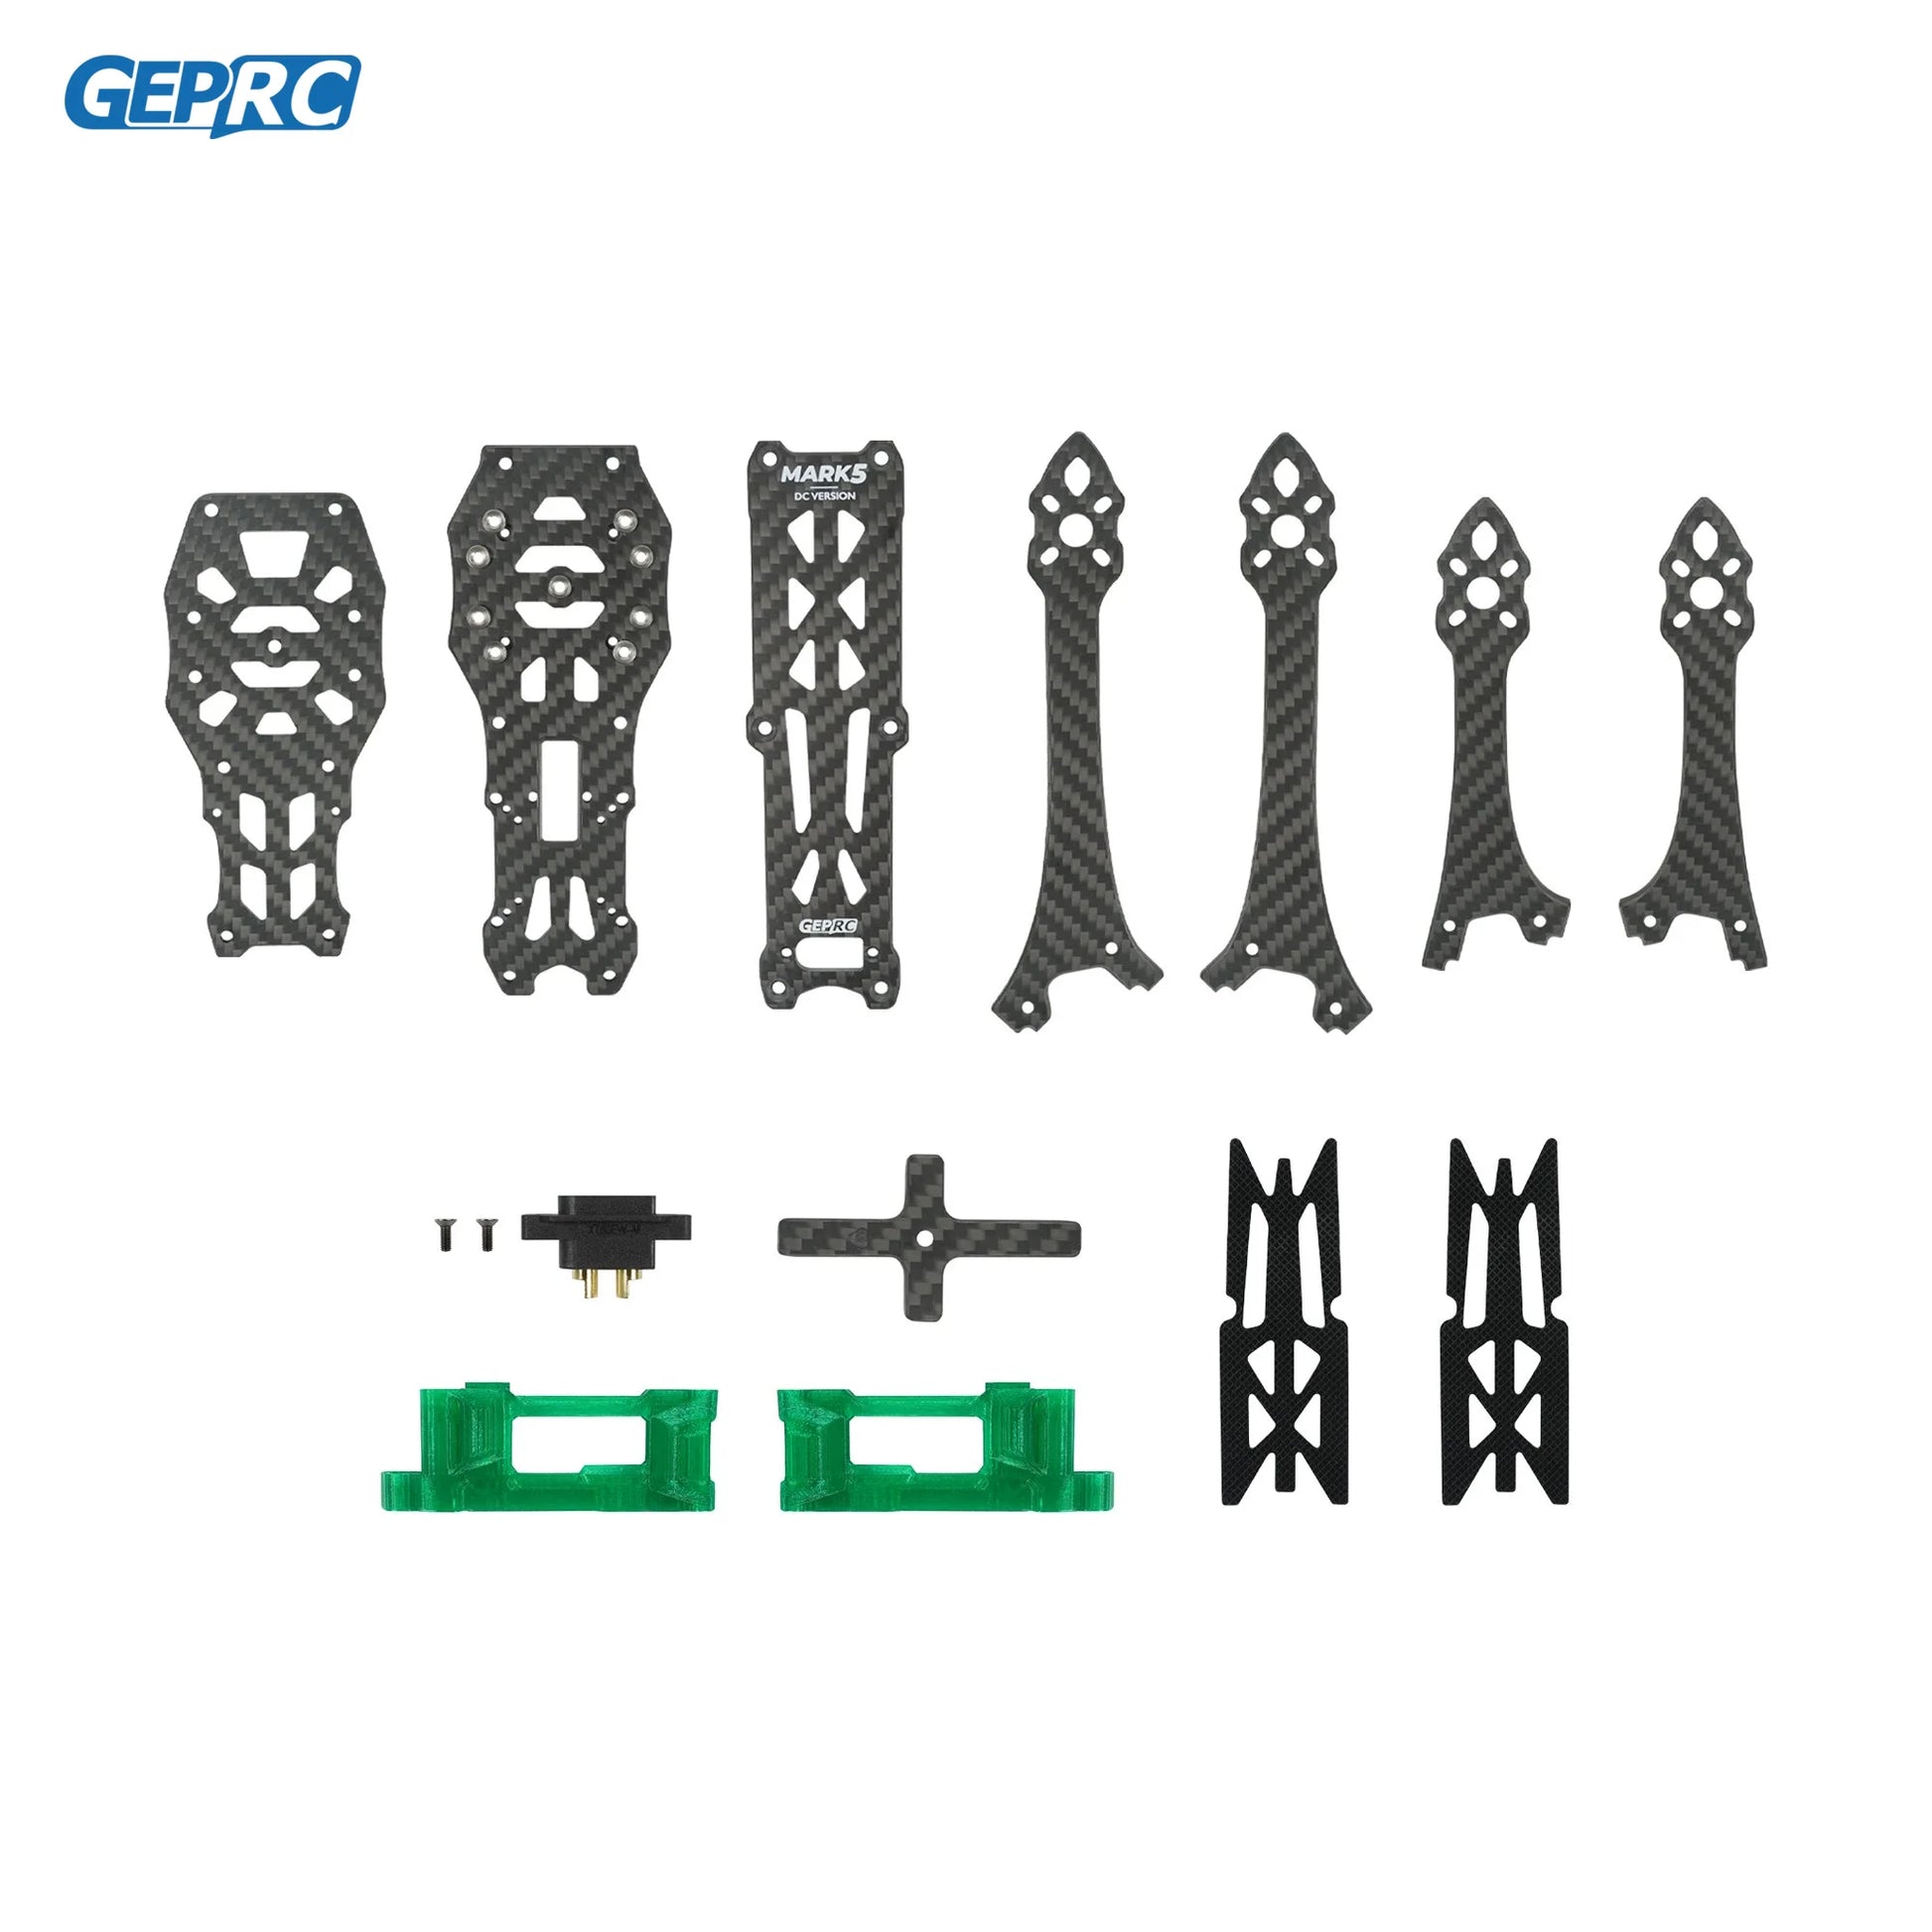 GEPRC GEP-MK5D O3 DeadCat Frame - DIY RC FPV Quadcopter for MARK5 O3 Version Long Range FPV Whoop Drone Accessories Replacement Parts